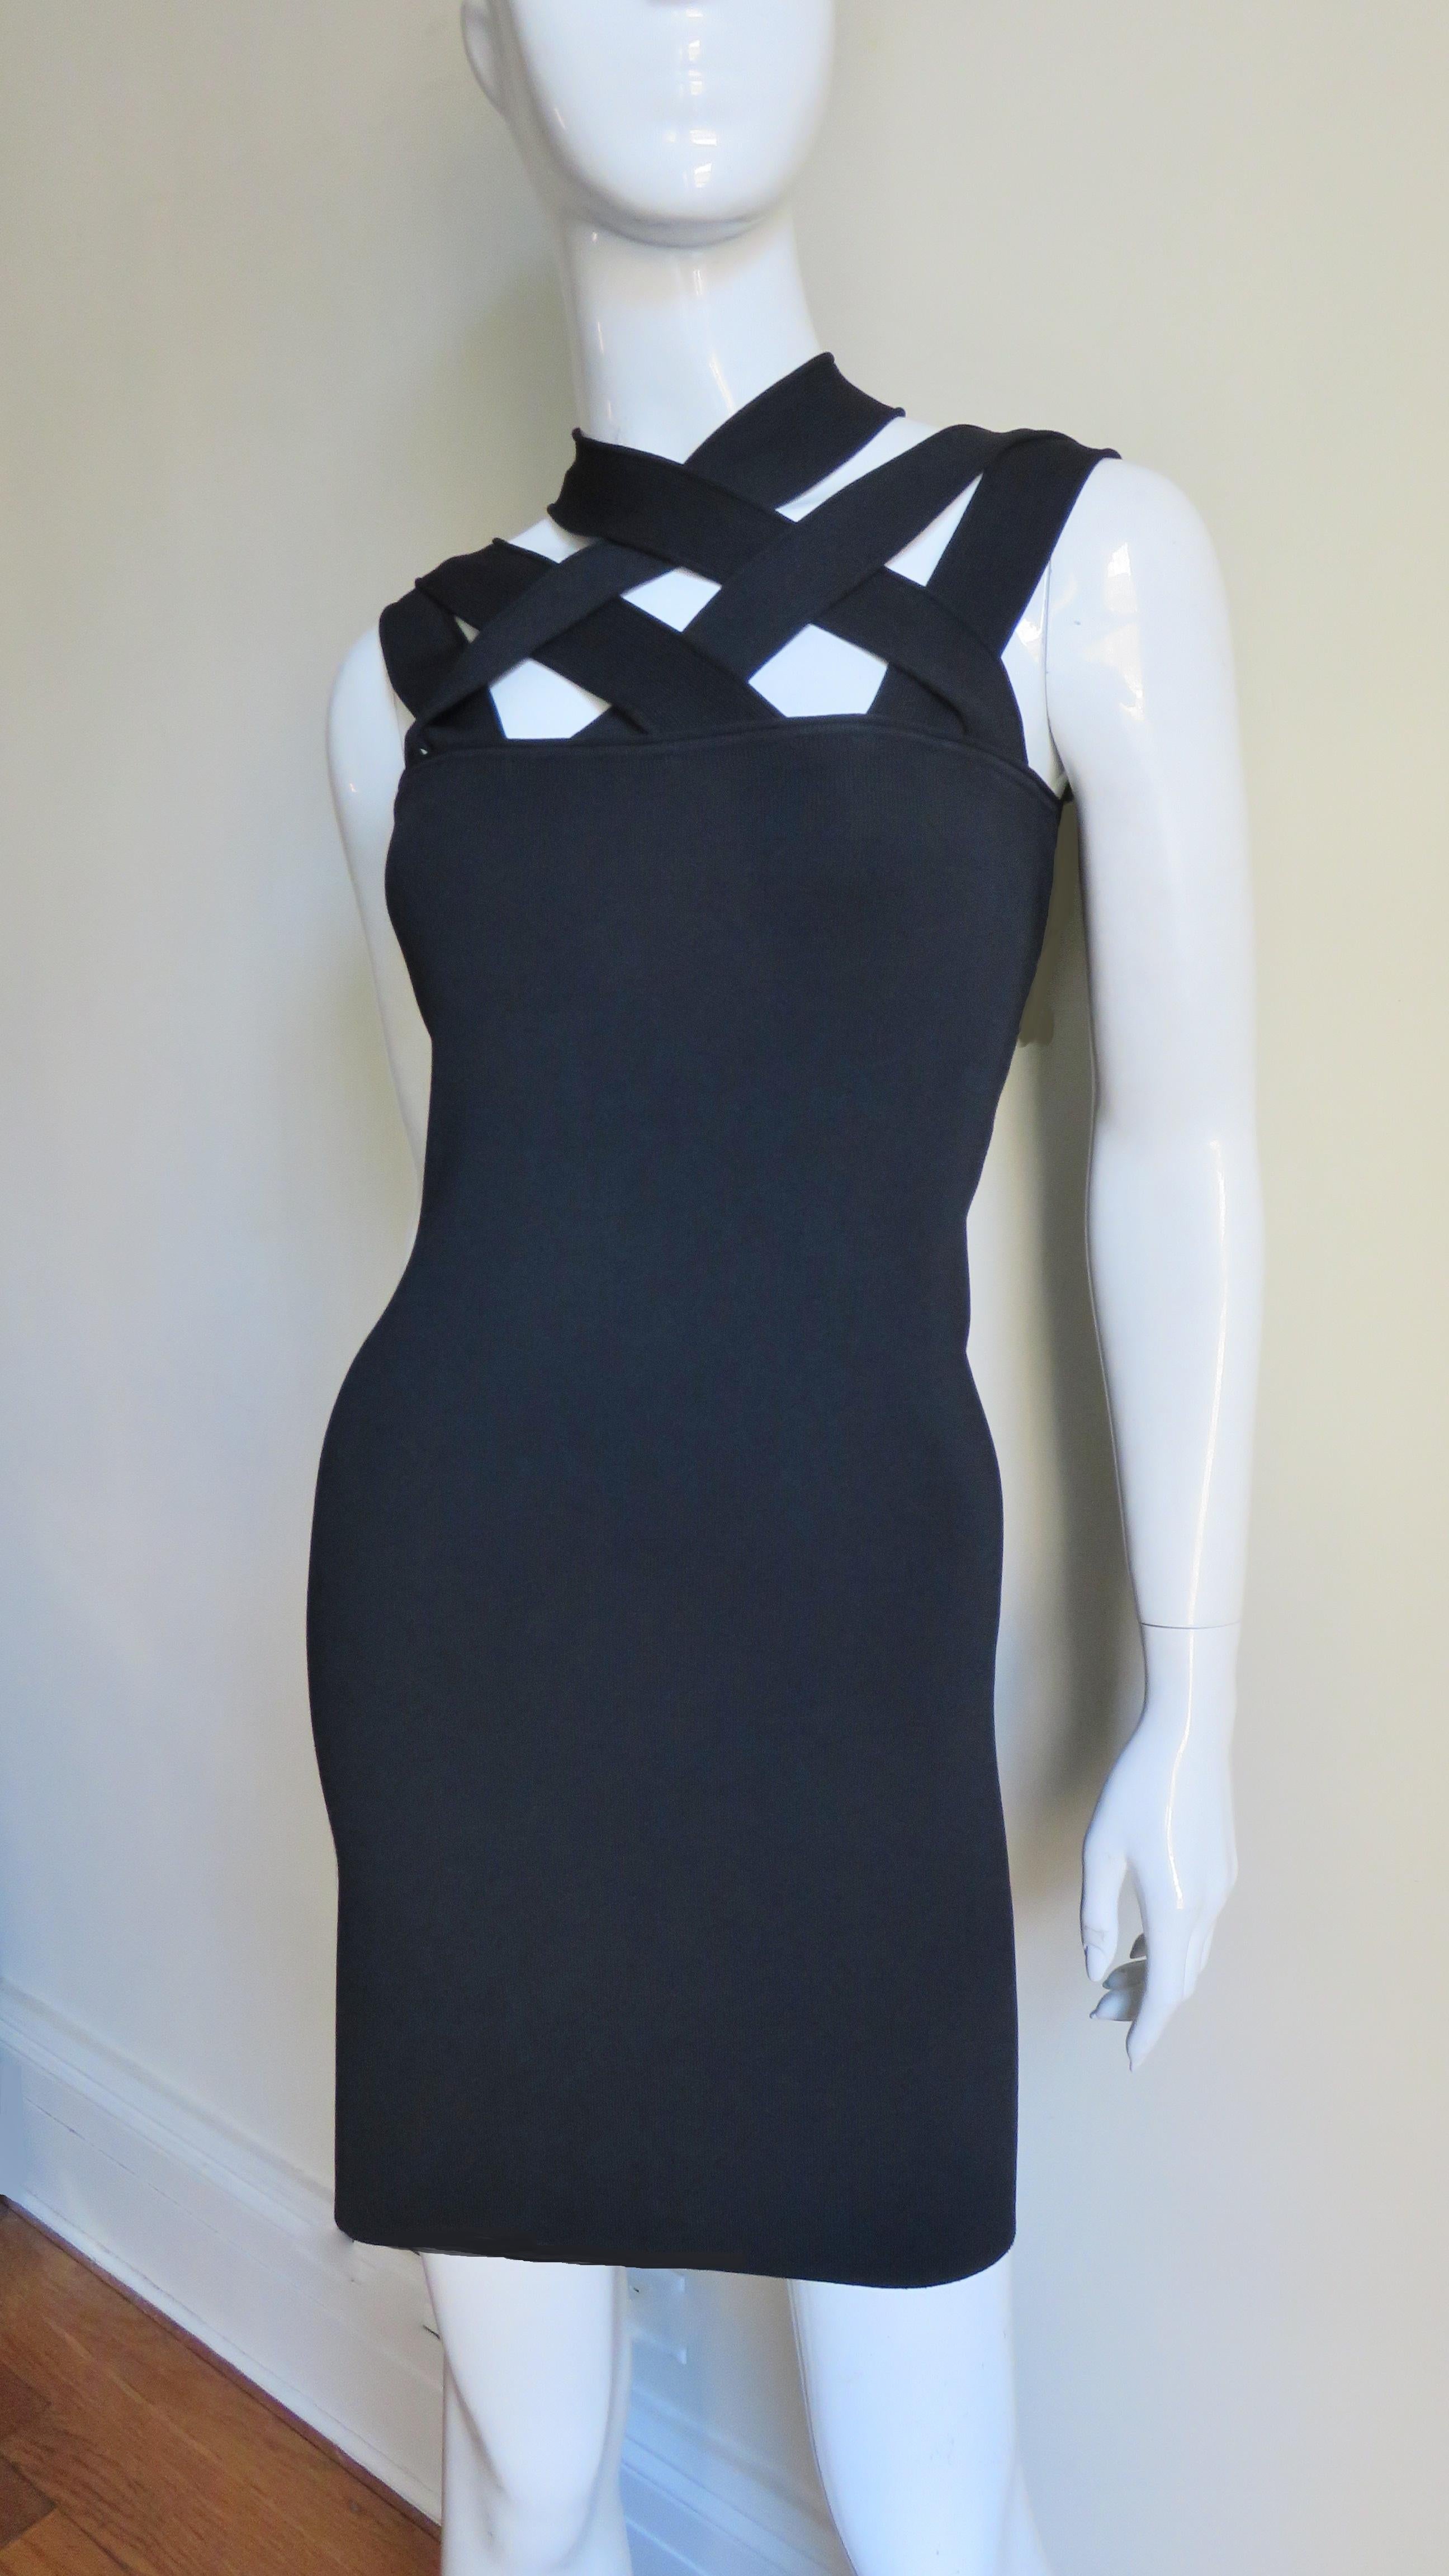 A great black bandage style dress from Givenchy.  It is fitted with criss crossing straps over the shoulders front and back.  The dress is unlined and goes on over the head.   
Fits sizes Extra Small, Small, Medium.

Bust  33-36